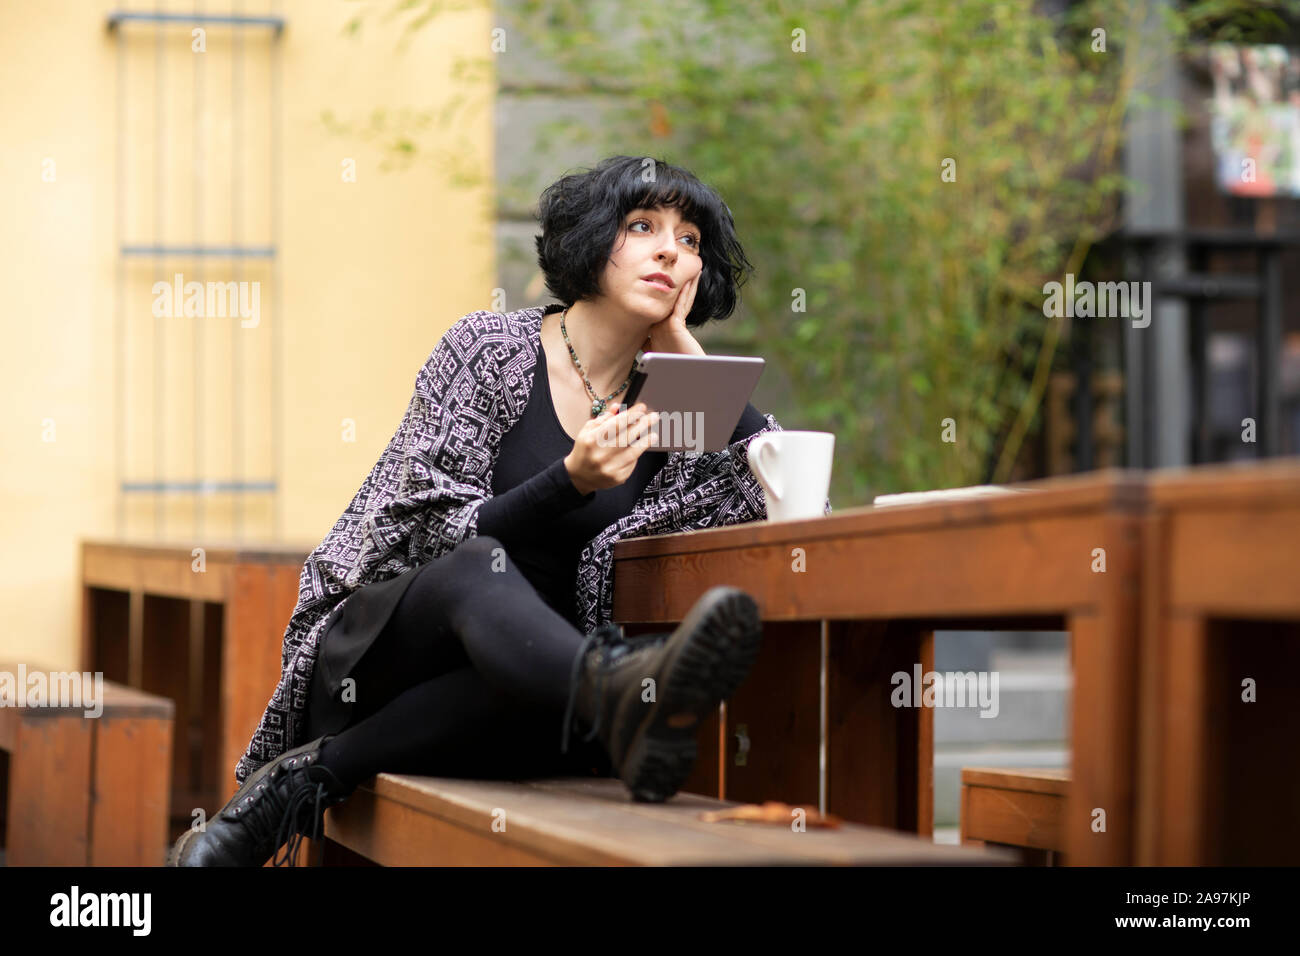 young woman with laptop outside working Stock Photo